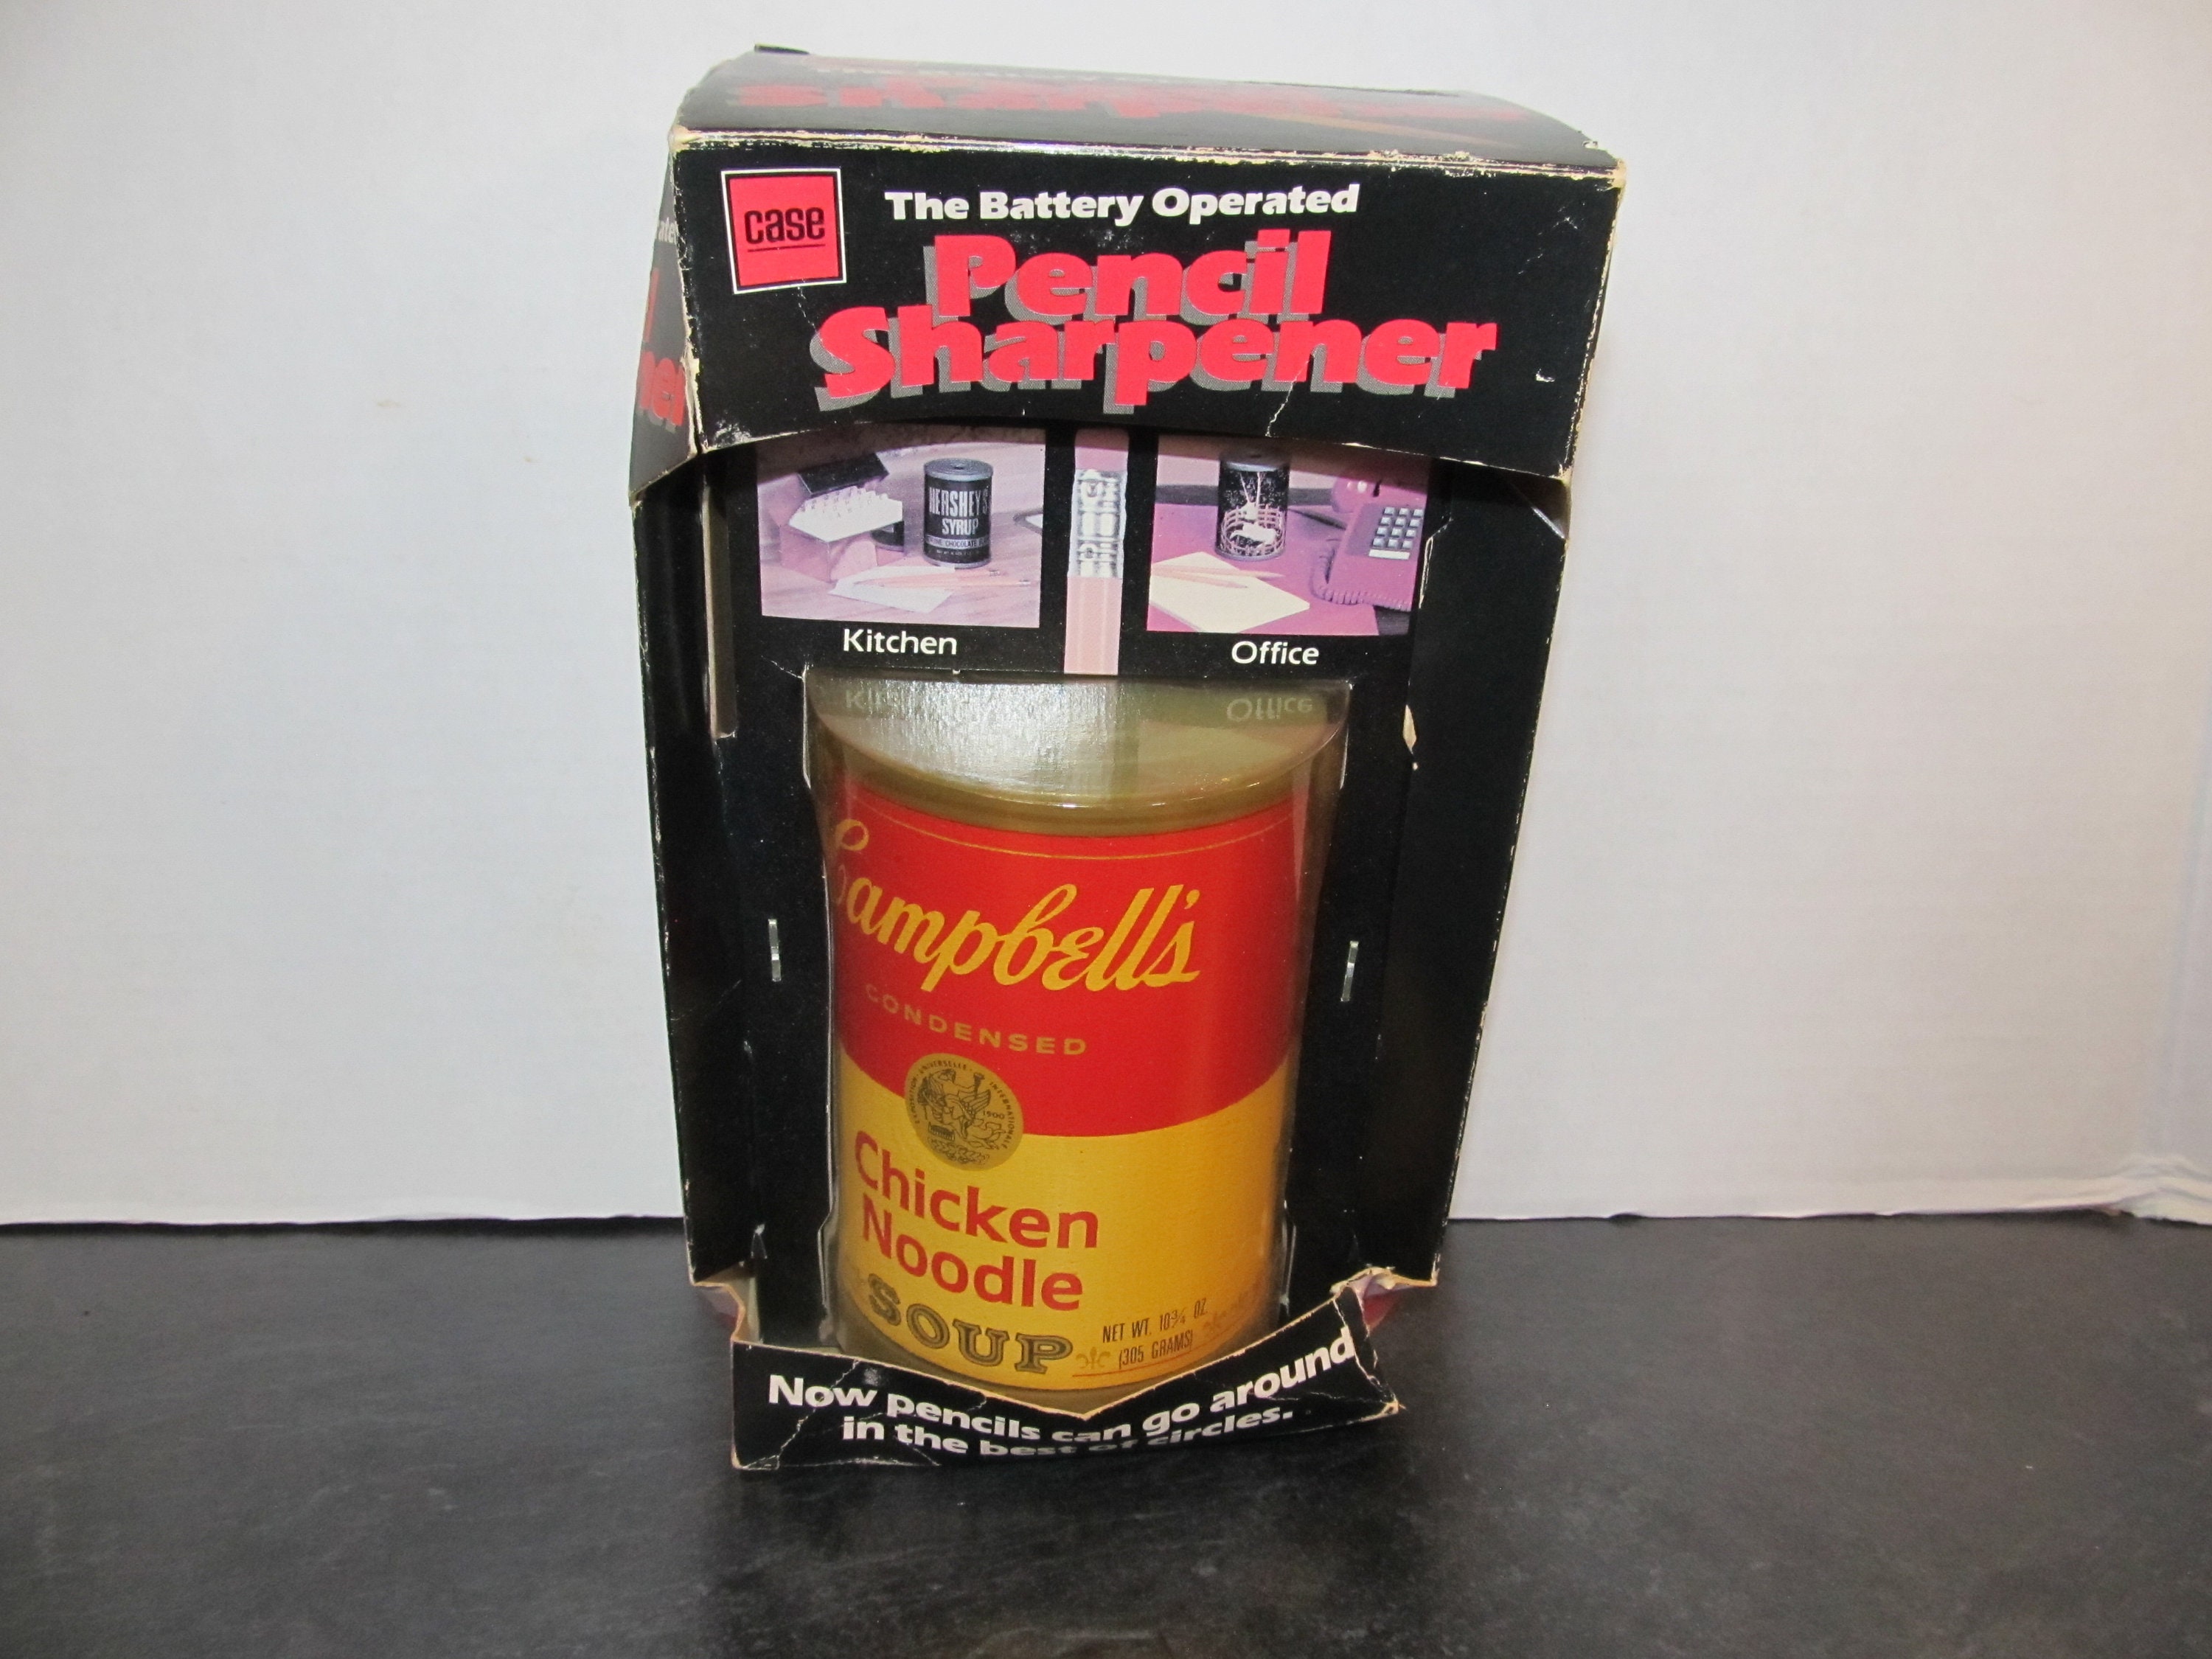 Vintage 1984 New Old Stock Campbell's Chicken Noodle Soup Battery Powered Pencil Sharpener By Case Stationery Co Rare Hard To Find